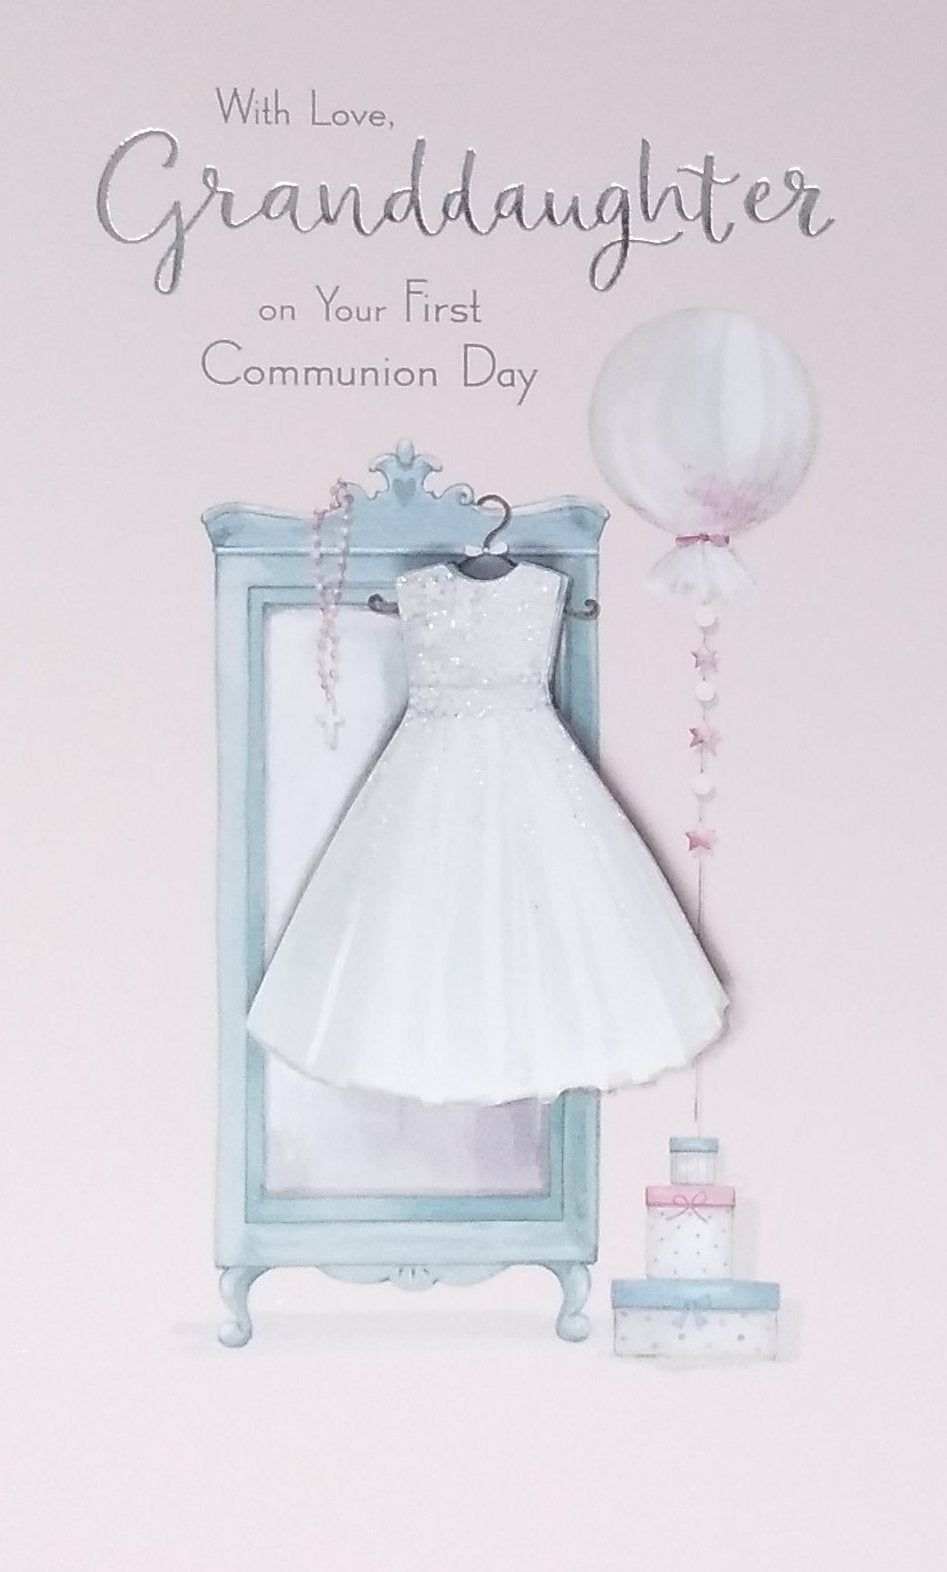 Communion Card - With Love, Granddaughter